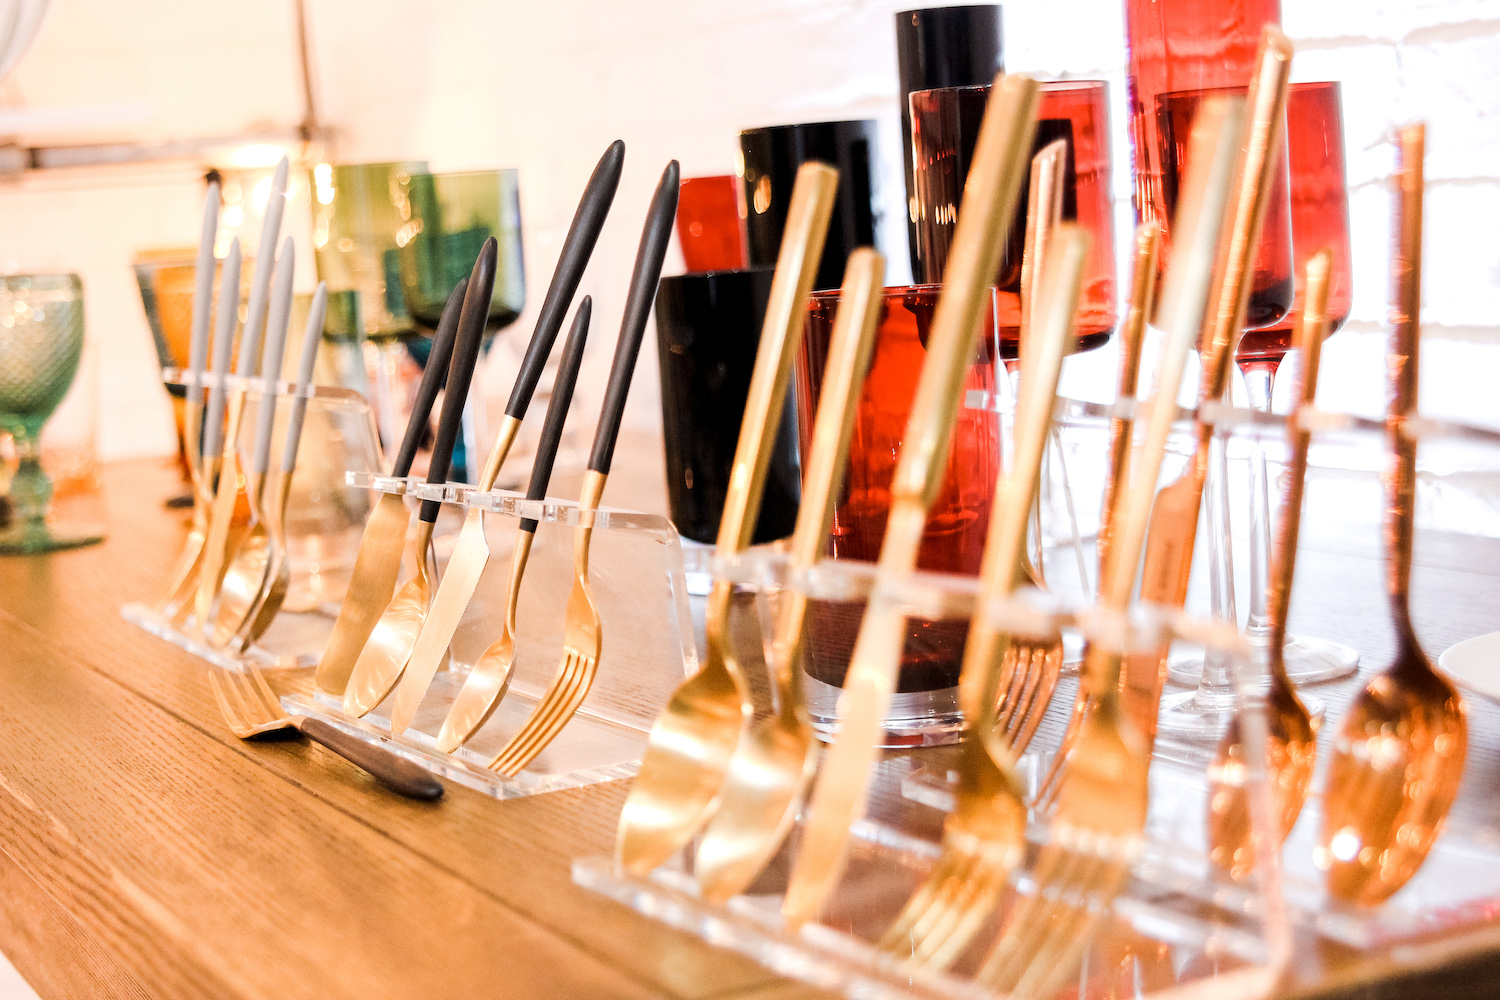 View of various flatware sets.